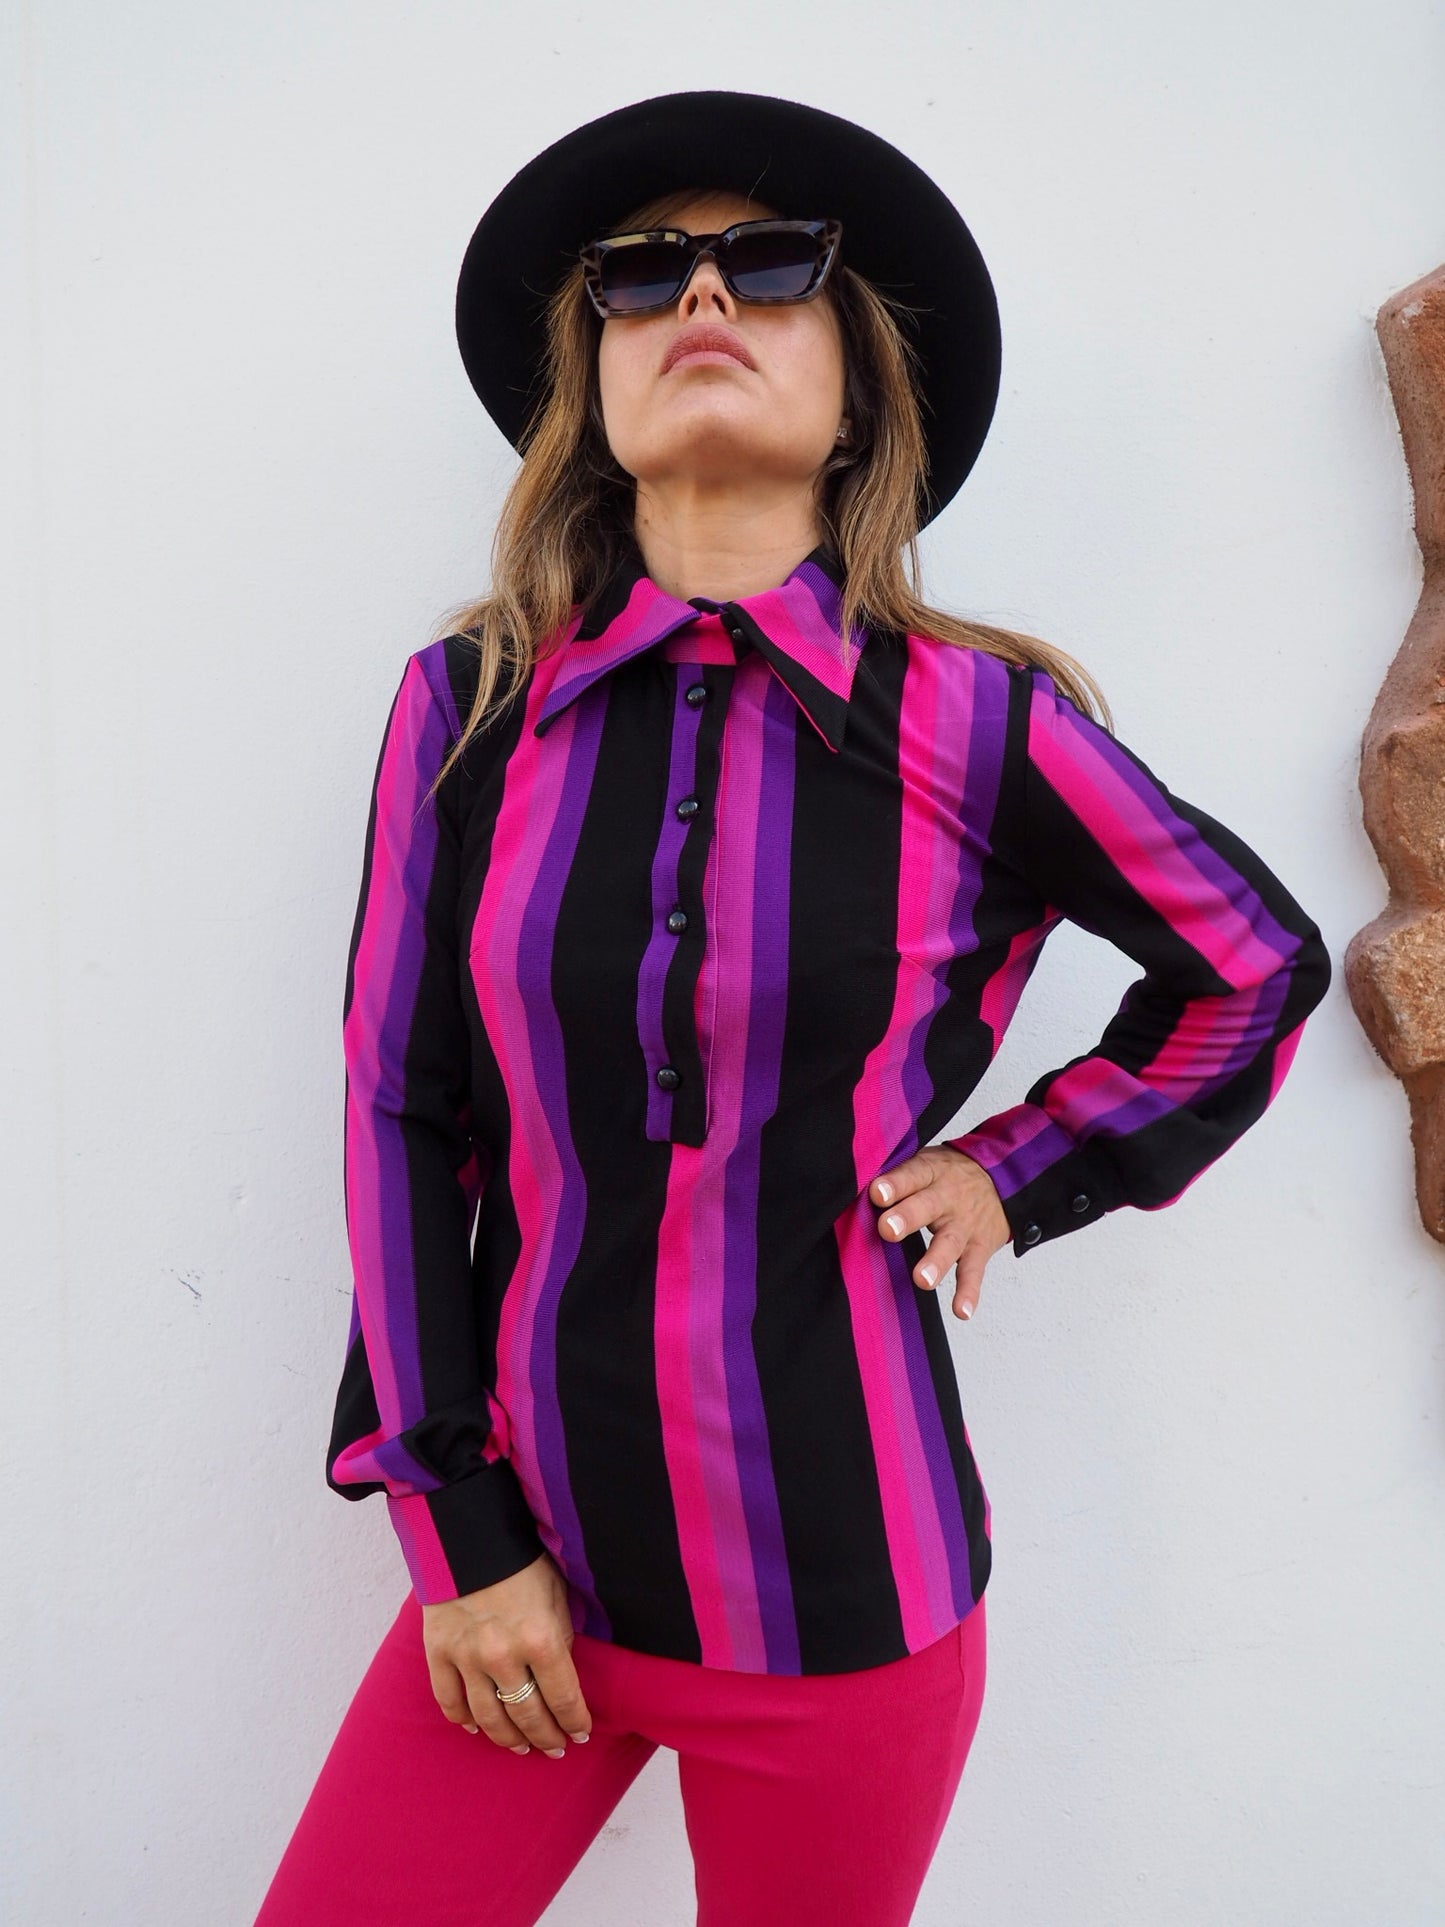 Original vintage 70’s cool printed polyester shirt with large collar and purple black striped design